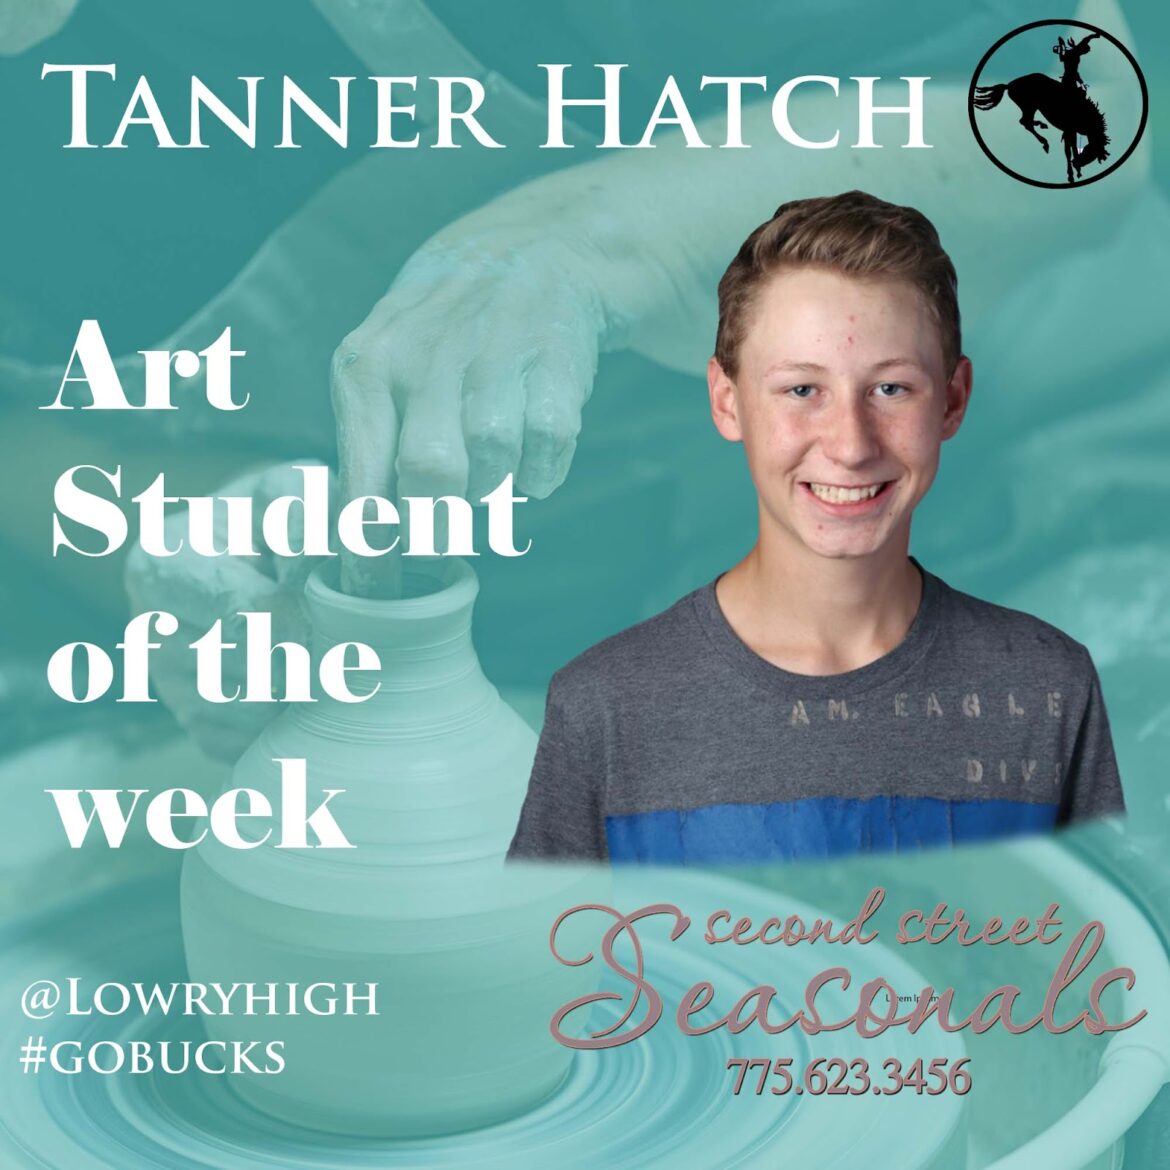 Art Student of the Week: Tanner Hatch